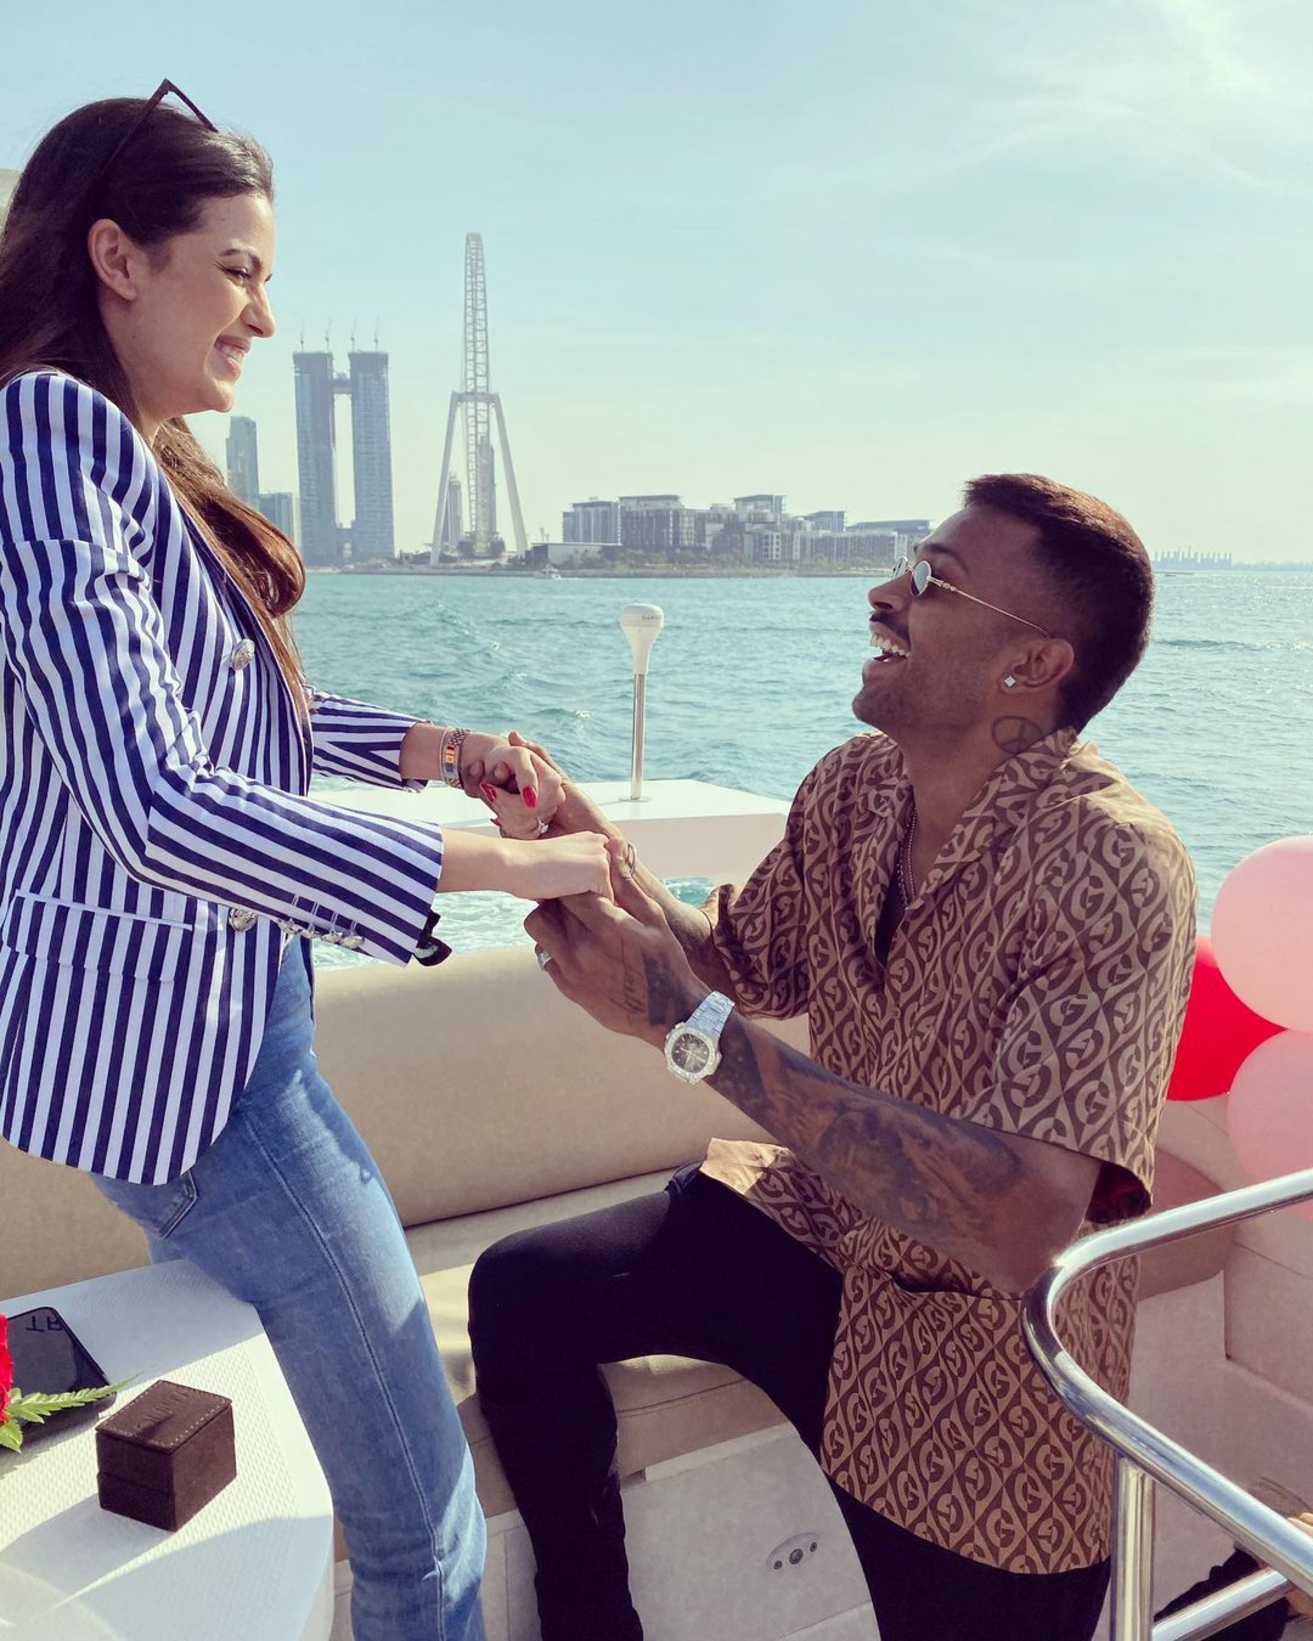 Hardik Pandya And Natasa Stankovic Are Acing Summer Couple Style In Pastels  And Florals